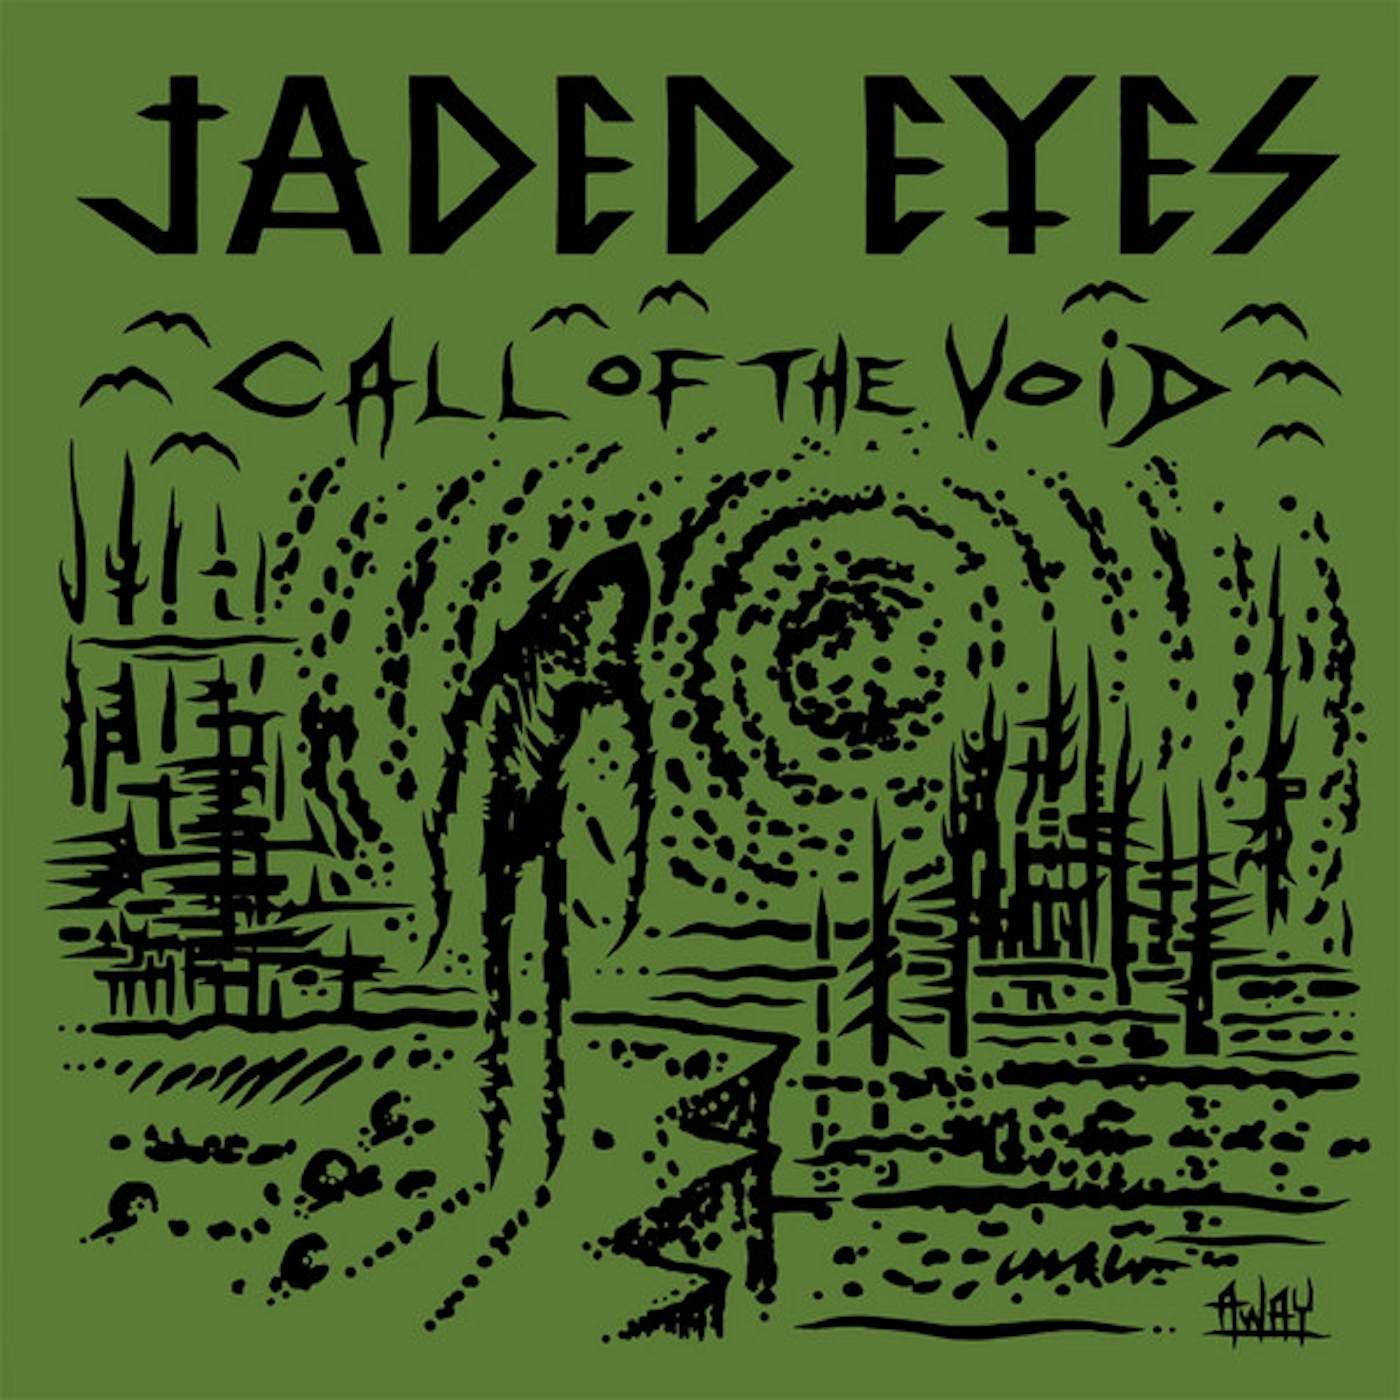 Jaded Eyes Call of the Void Vinyl Record